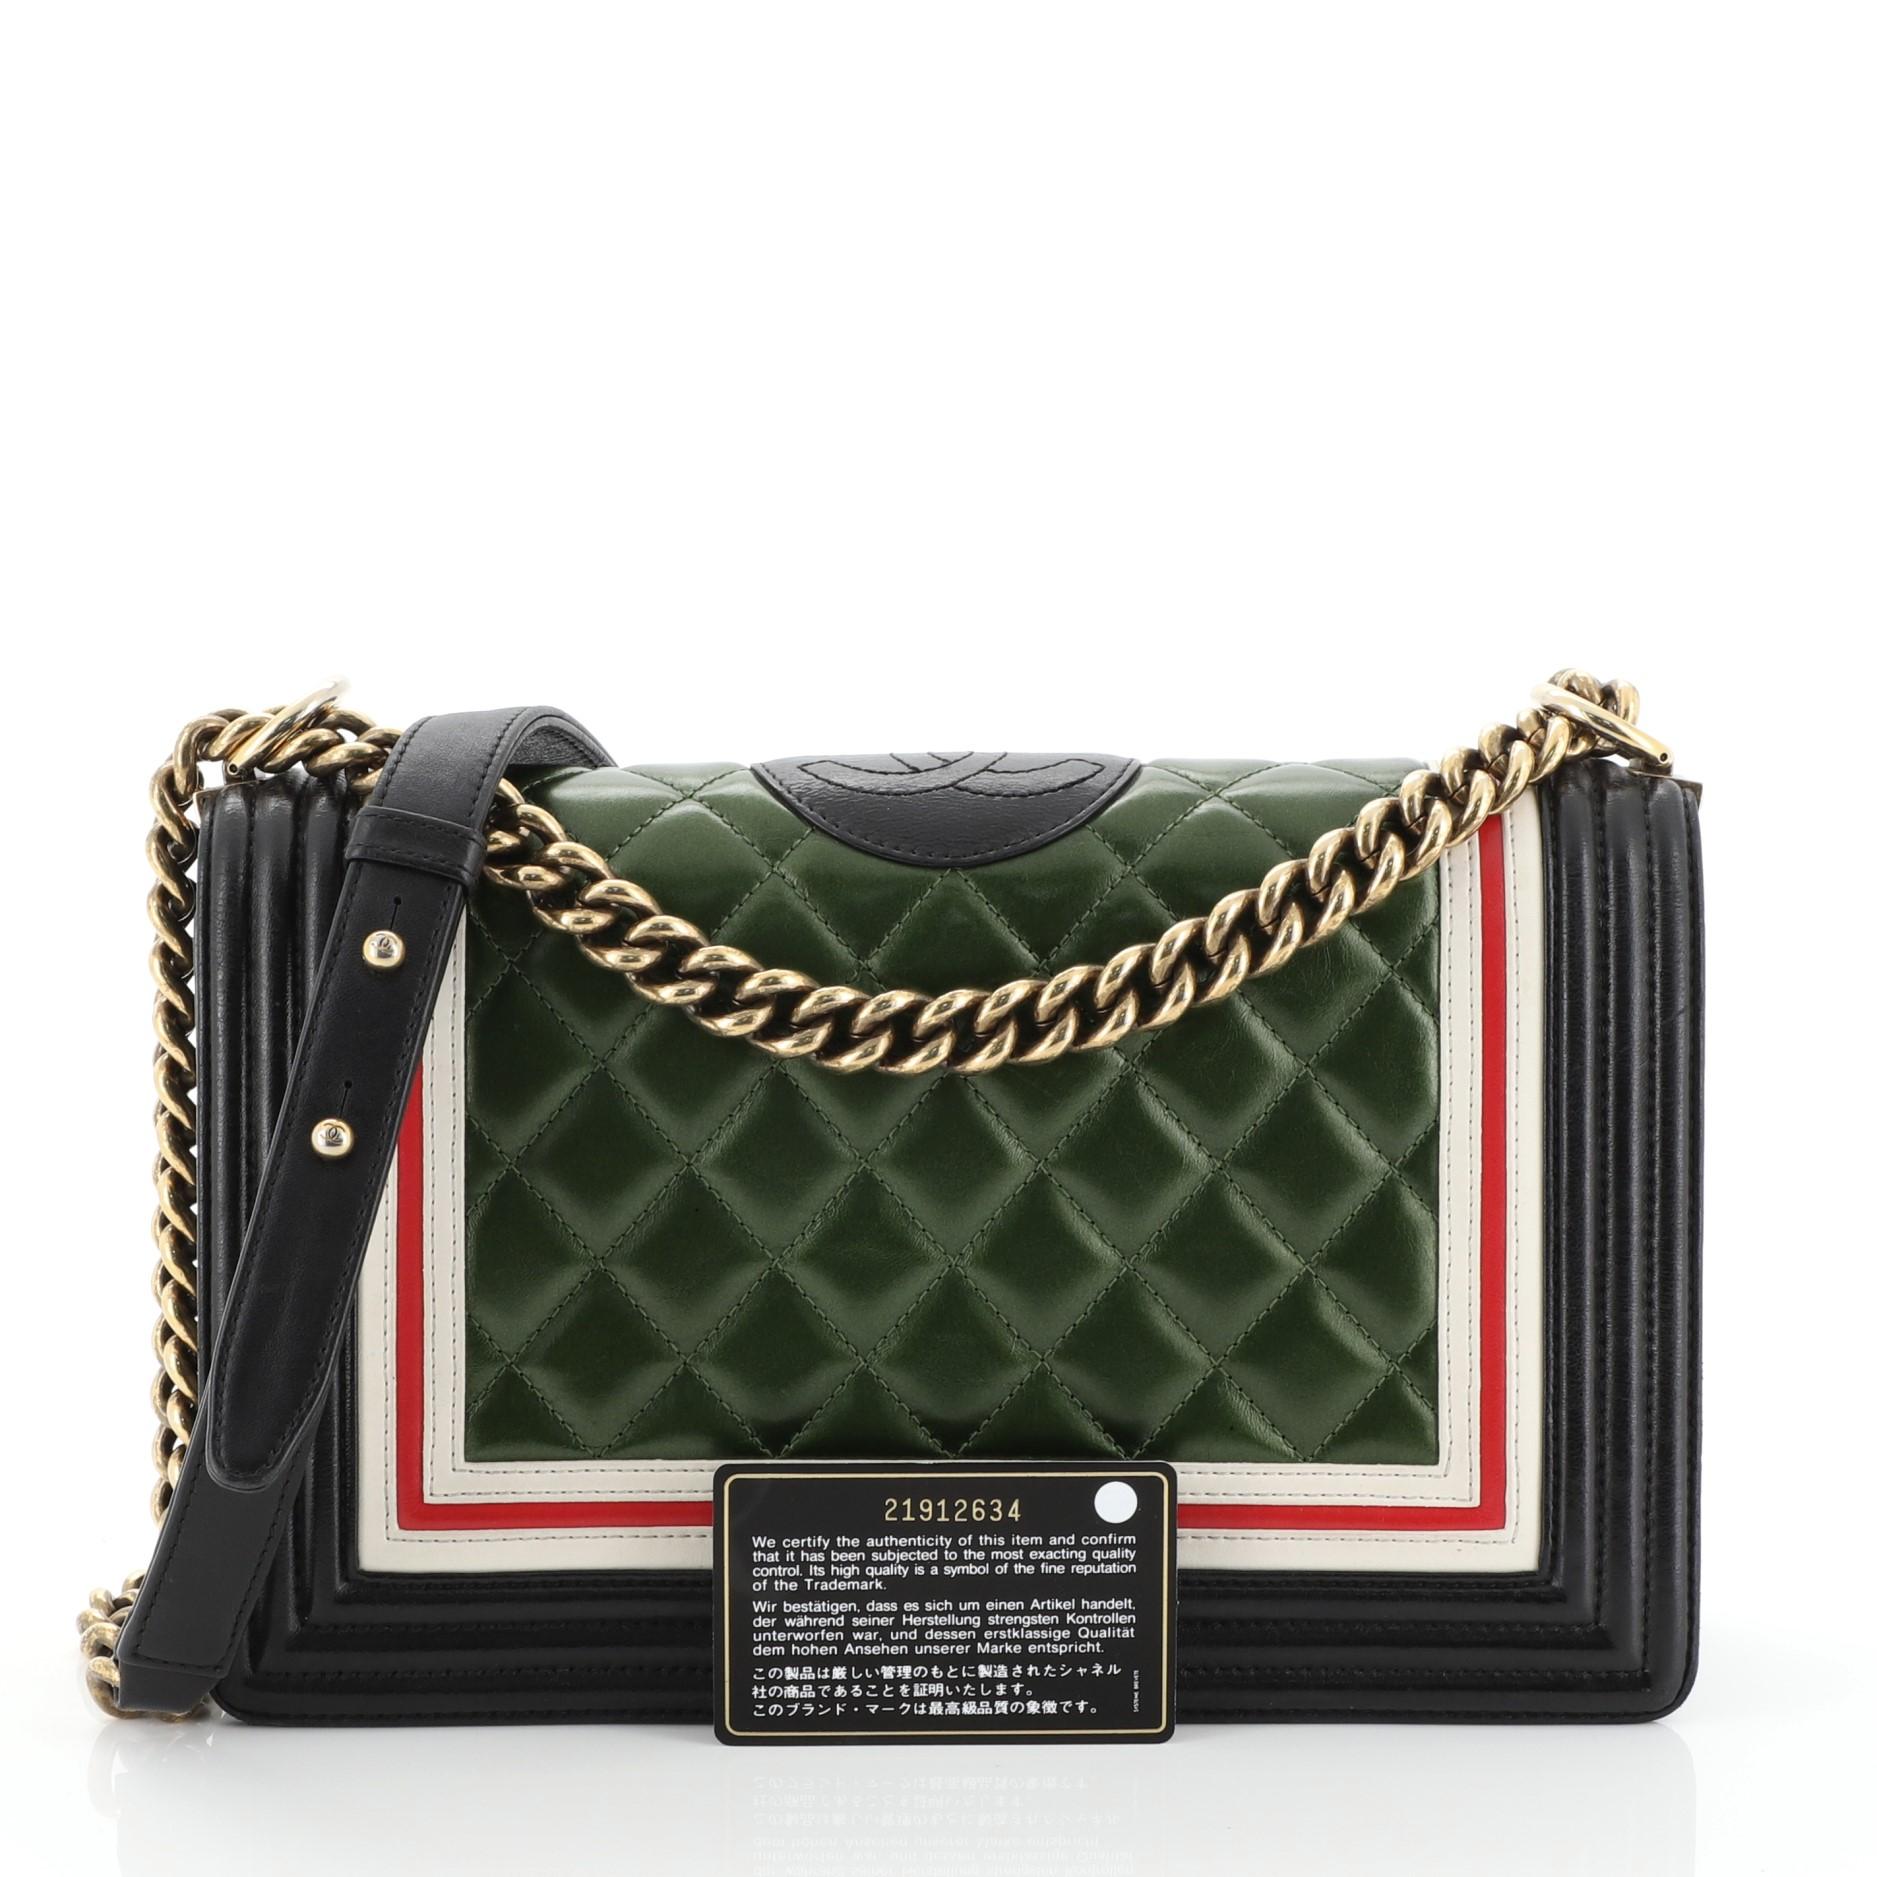 This Chanel Crest Boy Flap Bag Quilted Lambskin New Medium, crafted from green multicolored quilted lambskin leather, features chunky chain link strap with leather shoulder pad, red and white border trims and aged gold-tone hardware. Its CC Boy logo